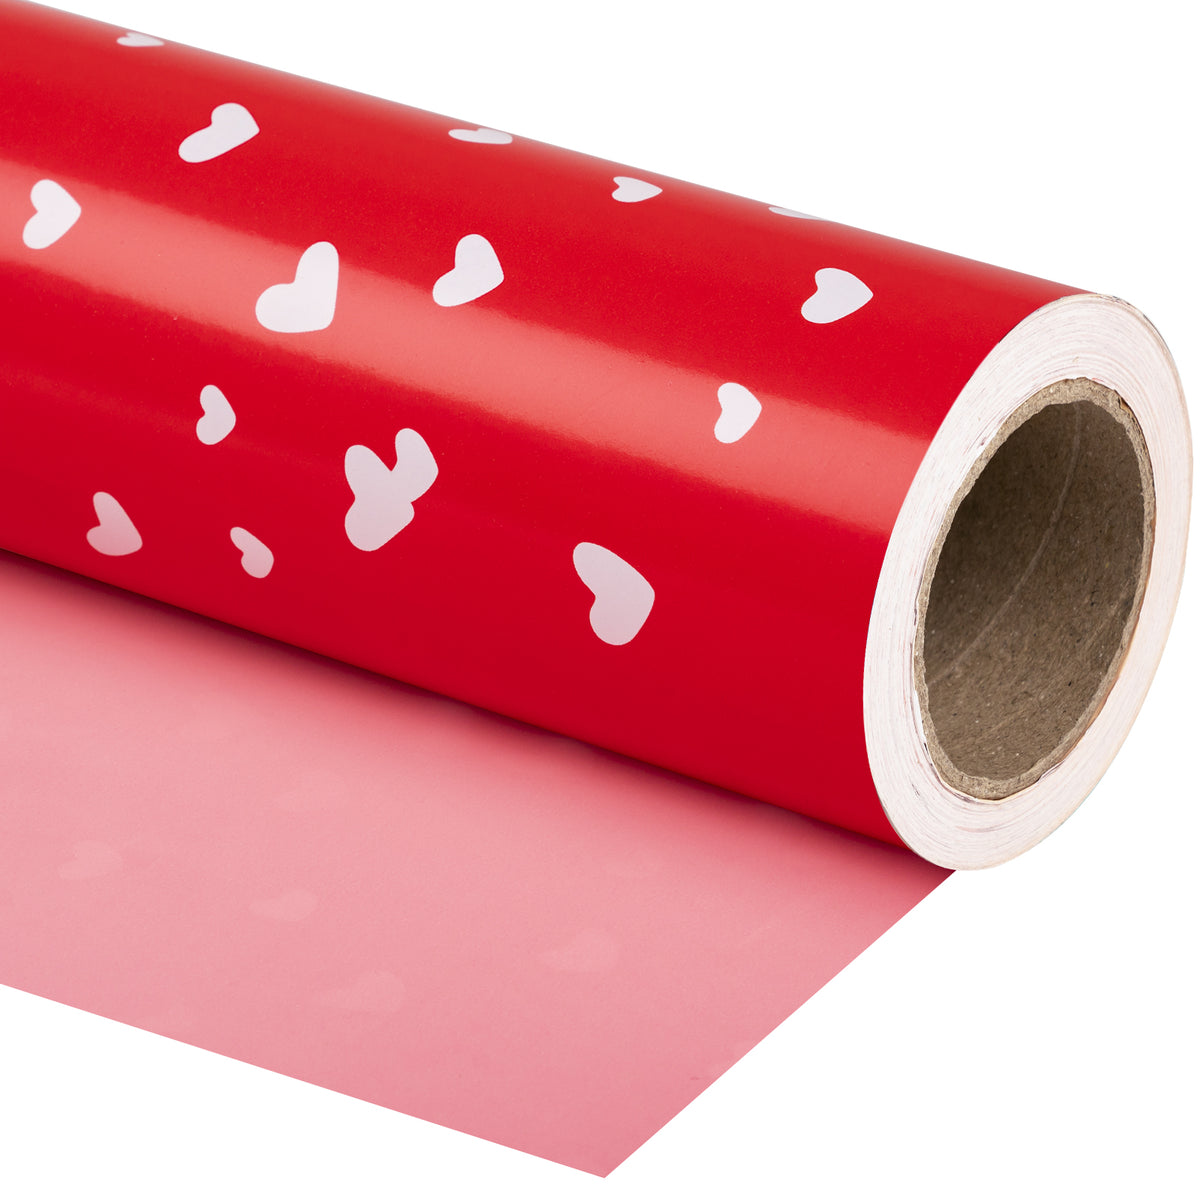 Valentines Wrapping Paper 30x417', Half Ream Roll